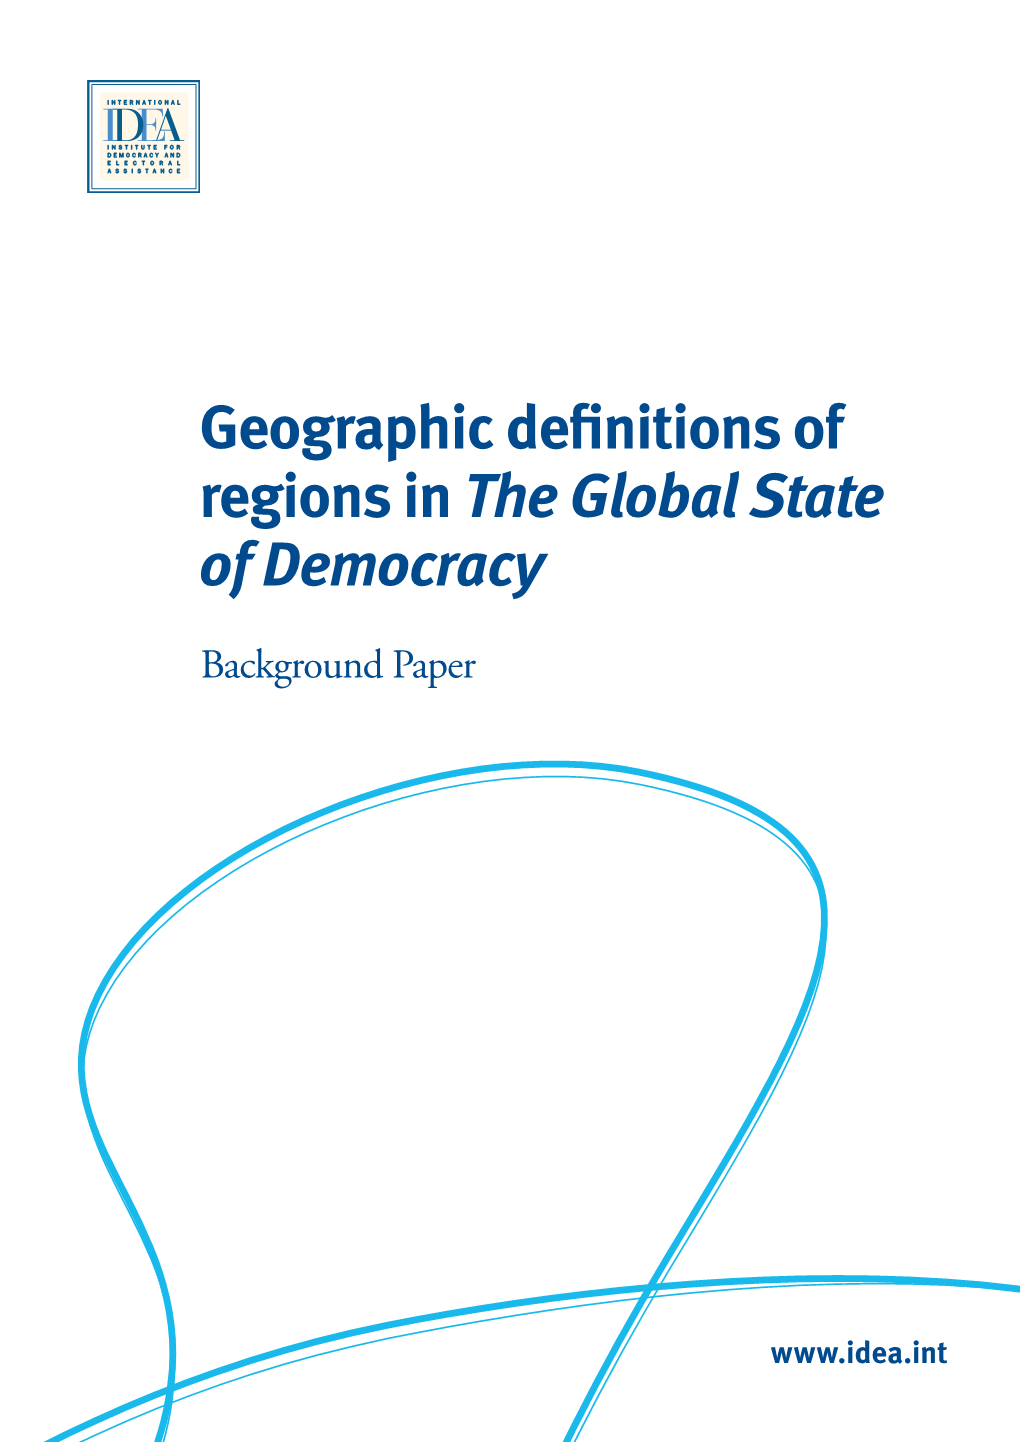 Geographic Definitions of Regions in the Global State of Democracy